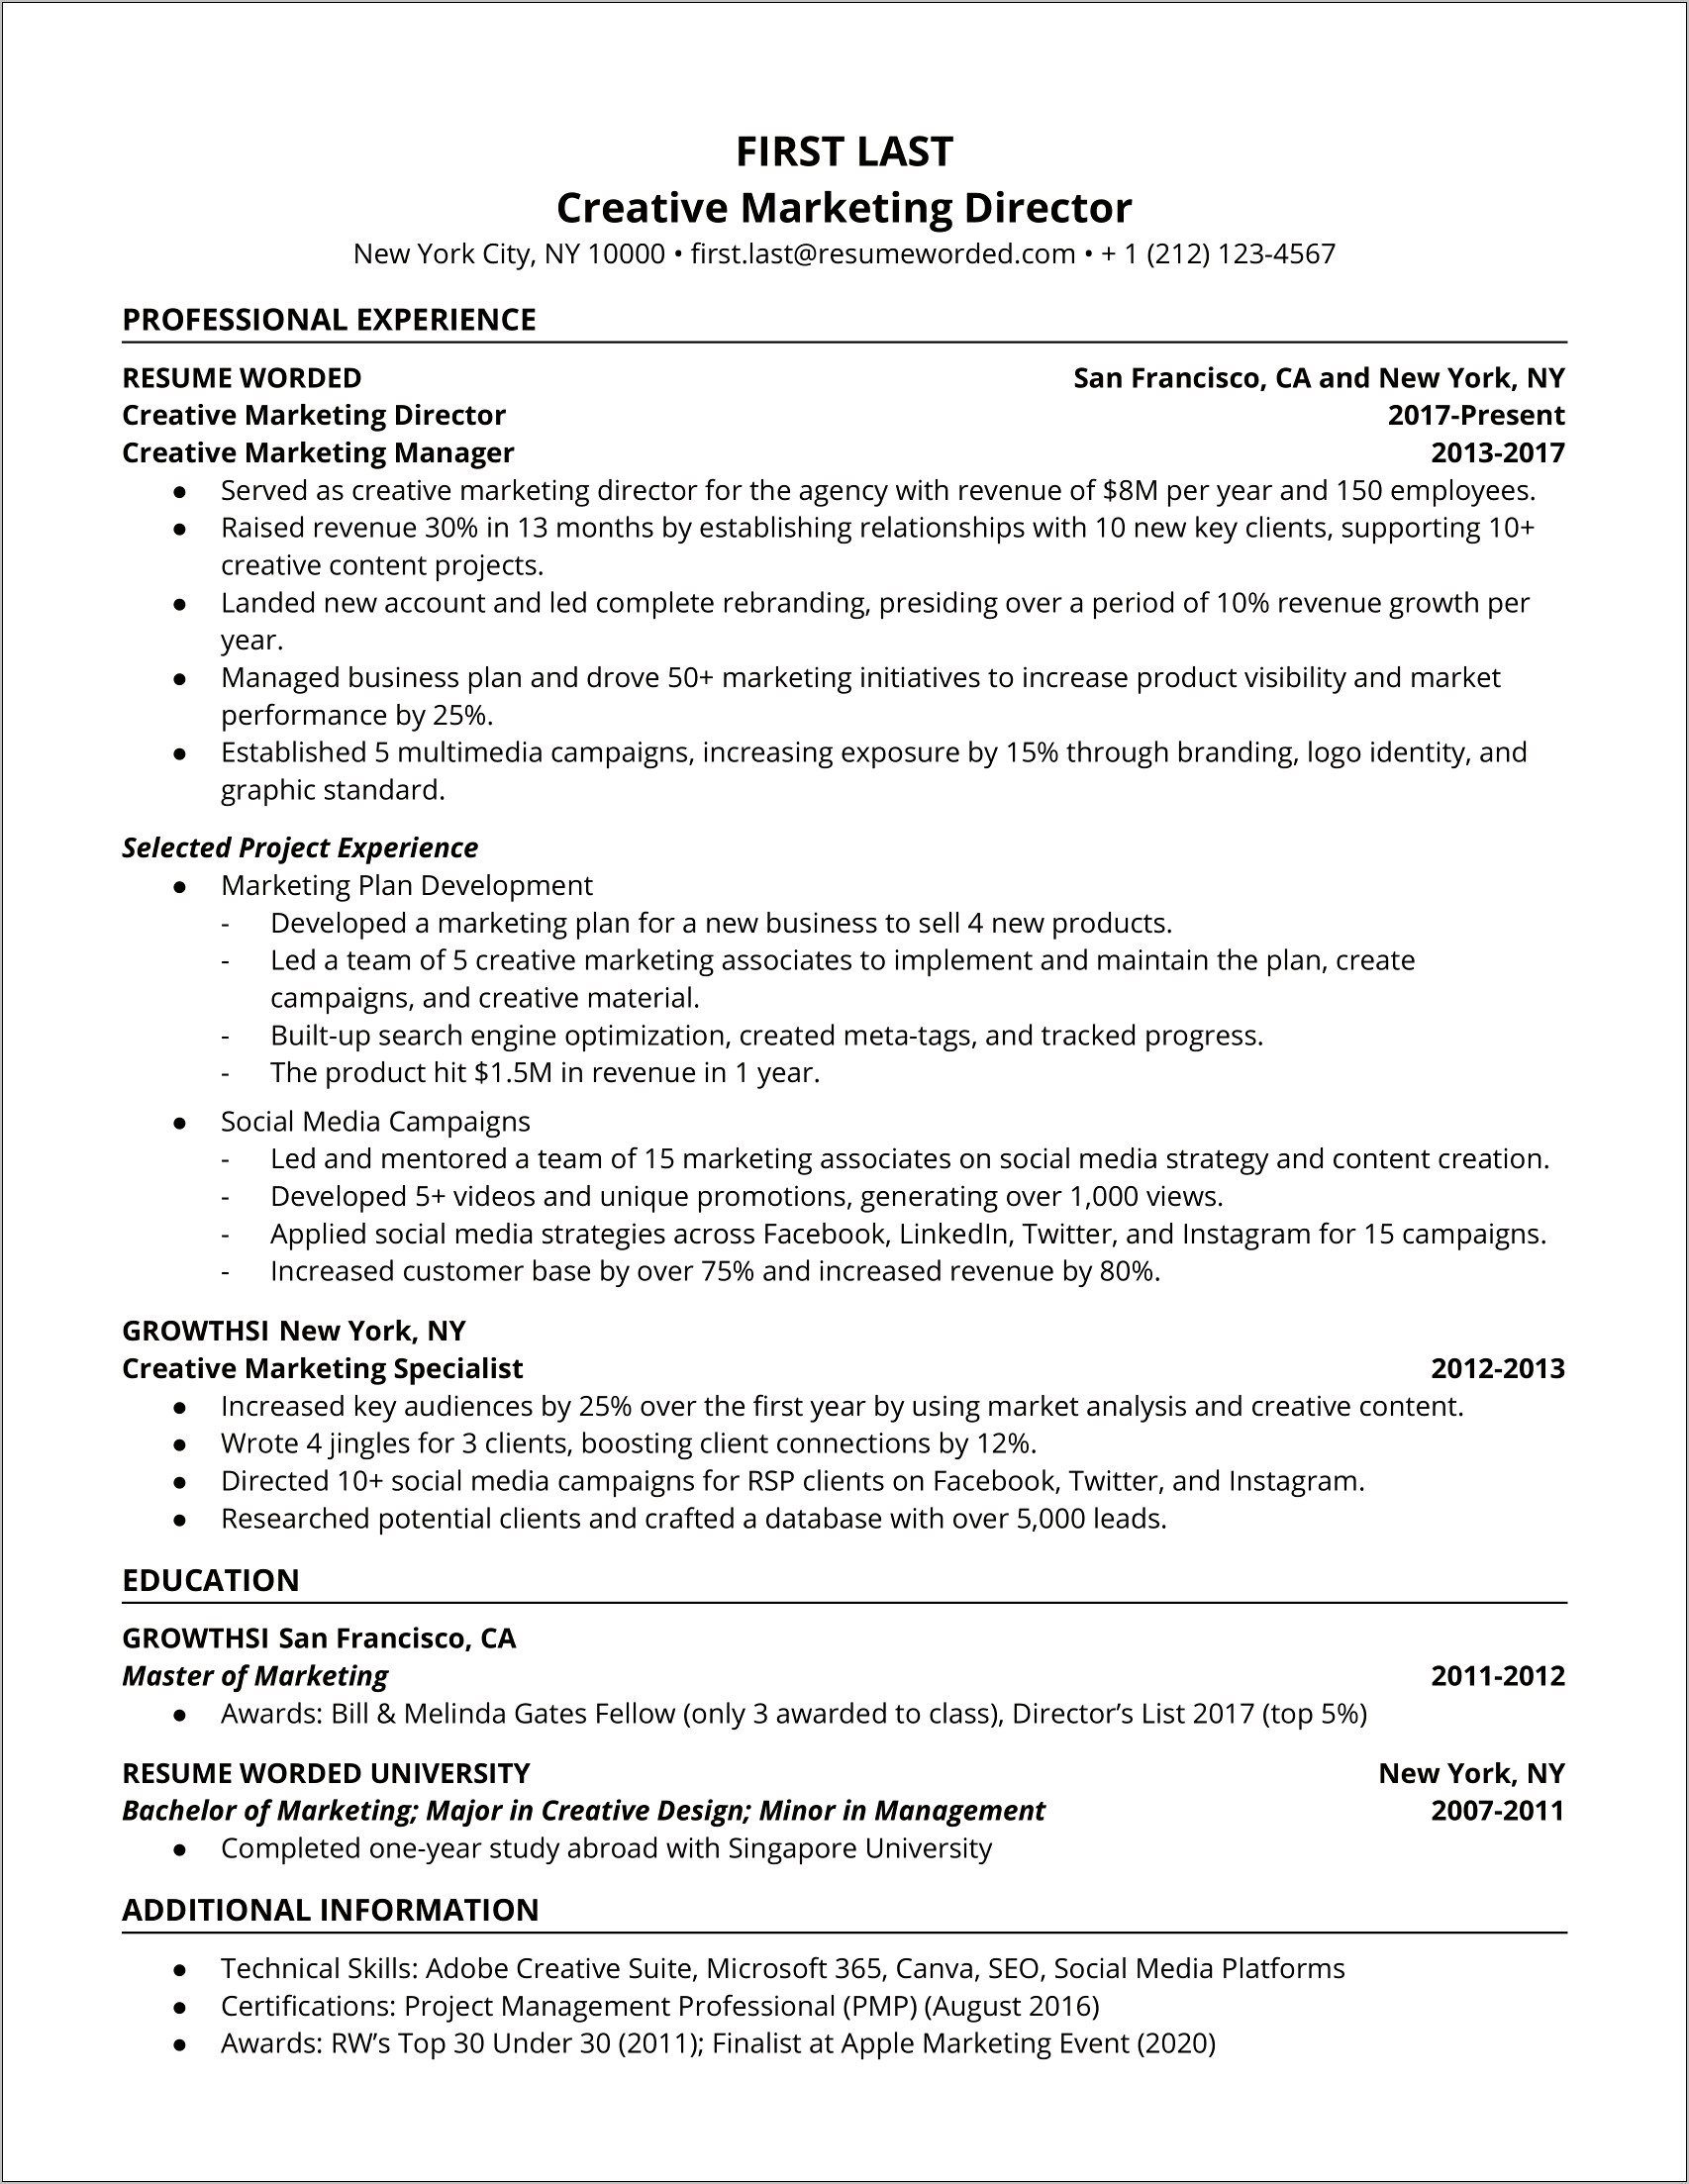 Marketing Director Resume With Freelance Experience